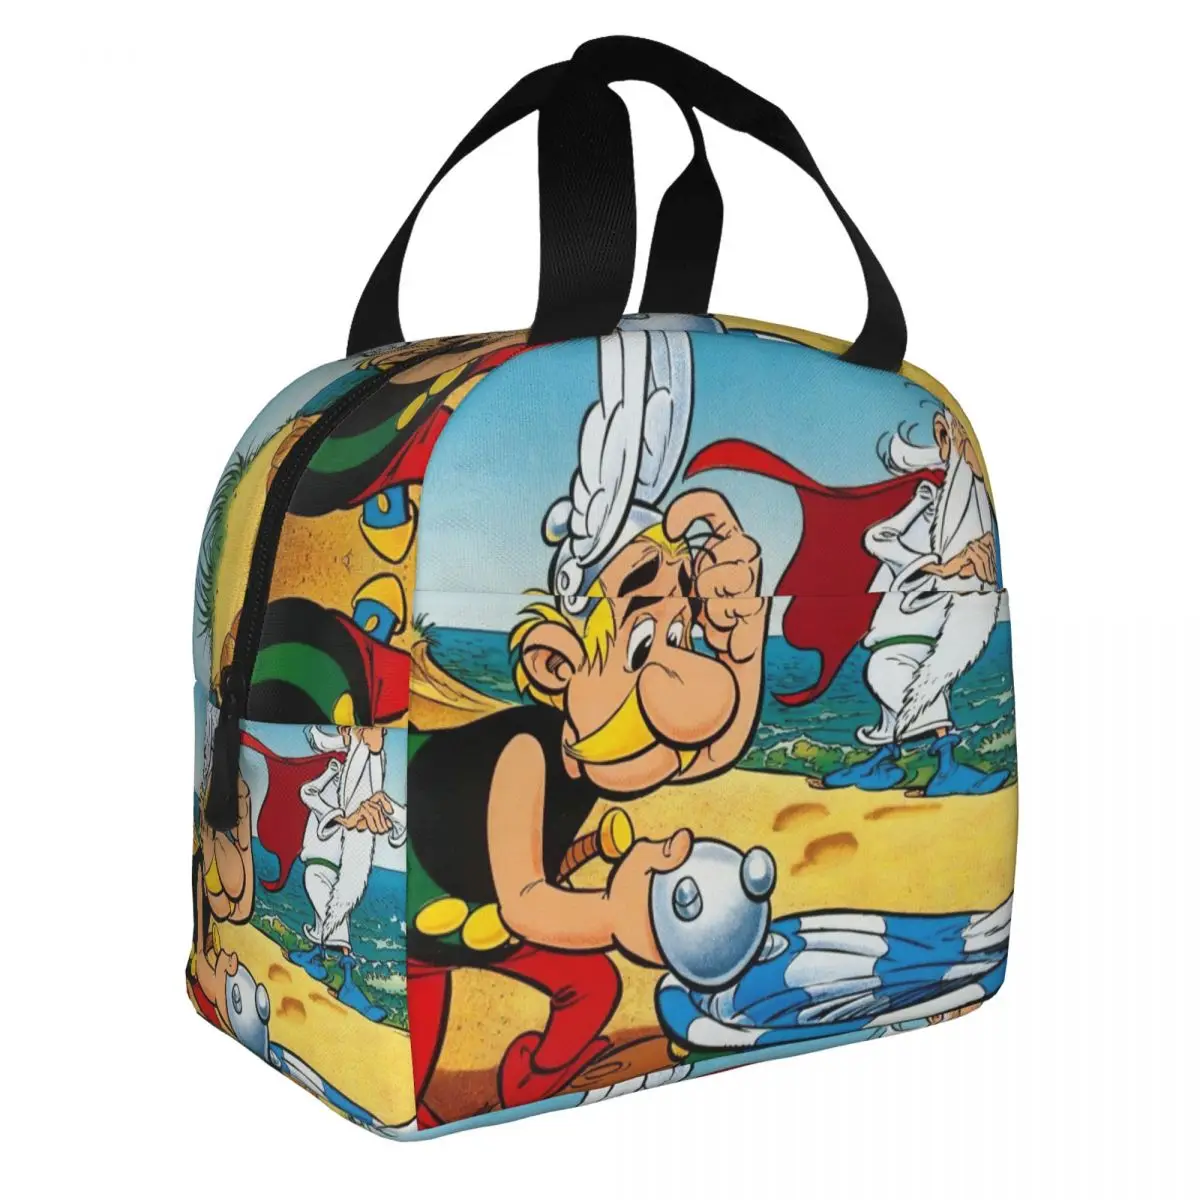 Asterix Obelix Lunch Bento Bags Portable Aluminum Foil thickened Thermal Cloth Lunch Bag for Women Men Boy